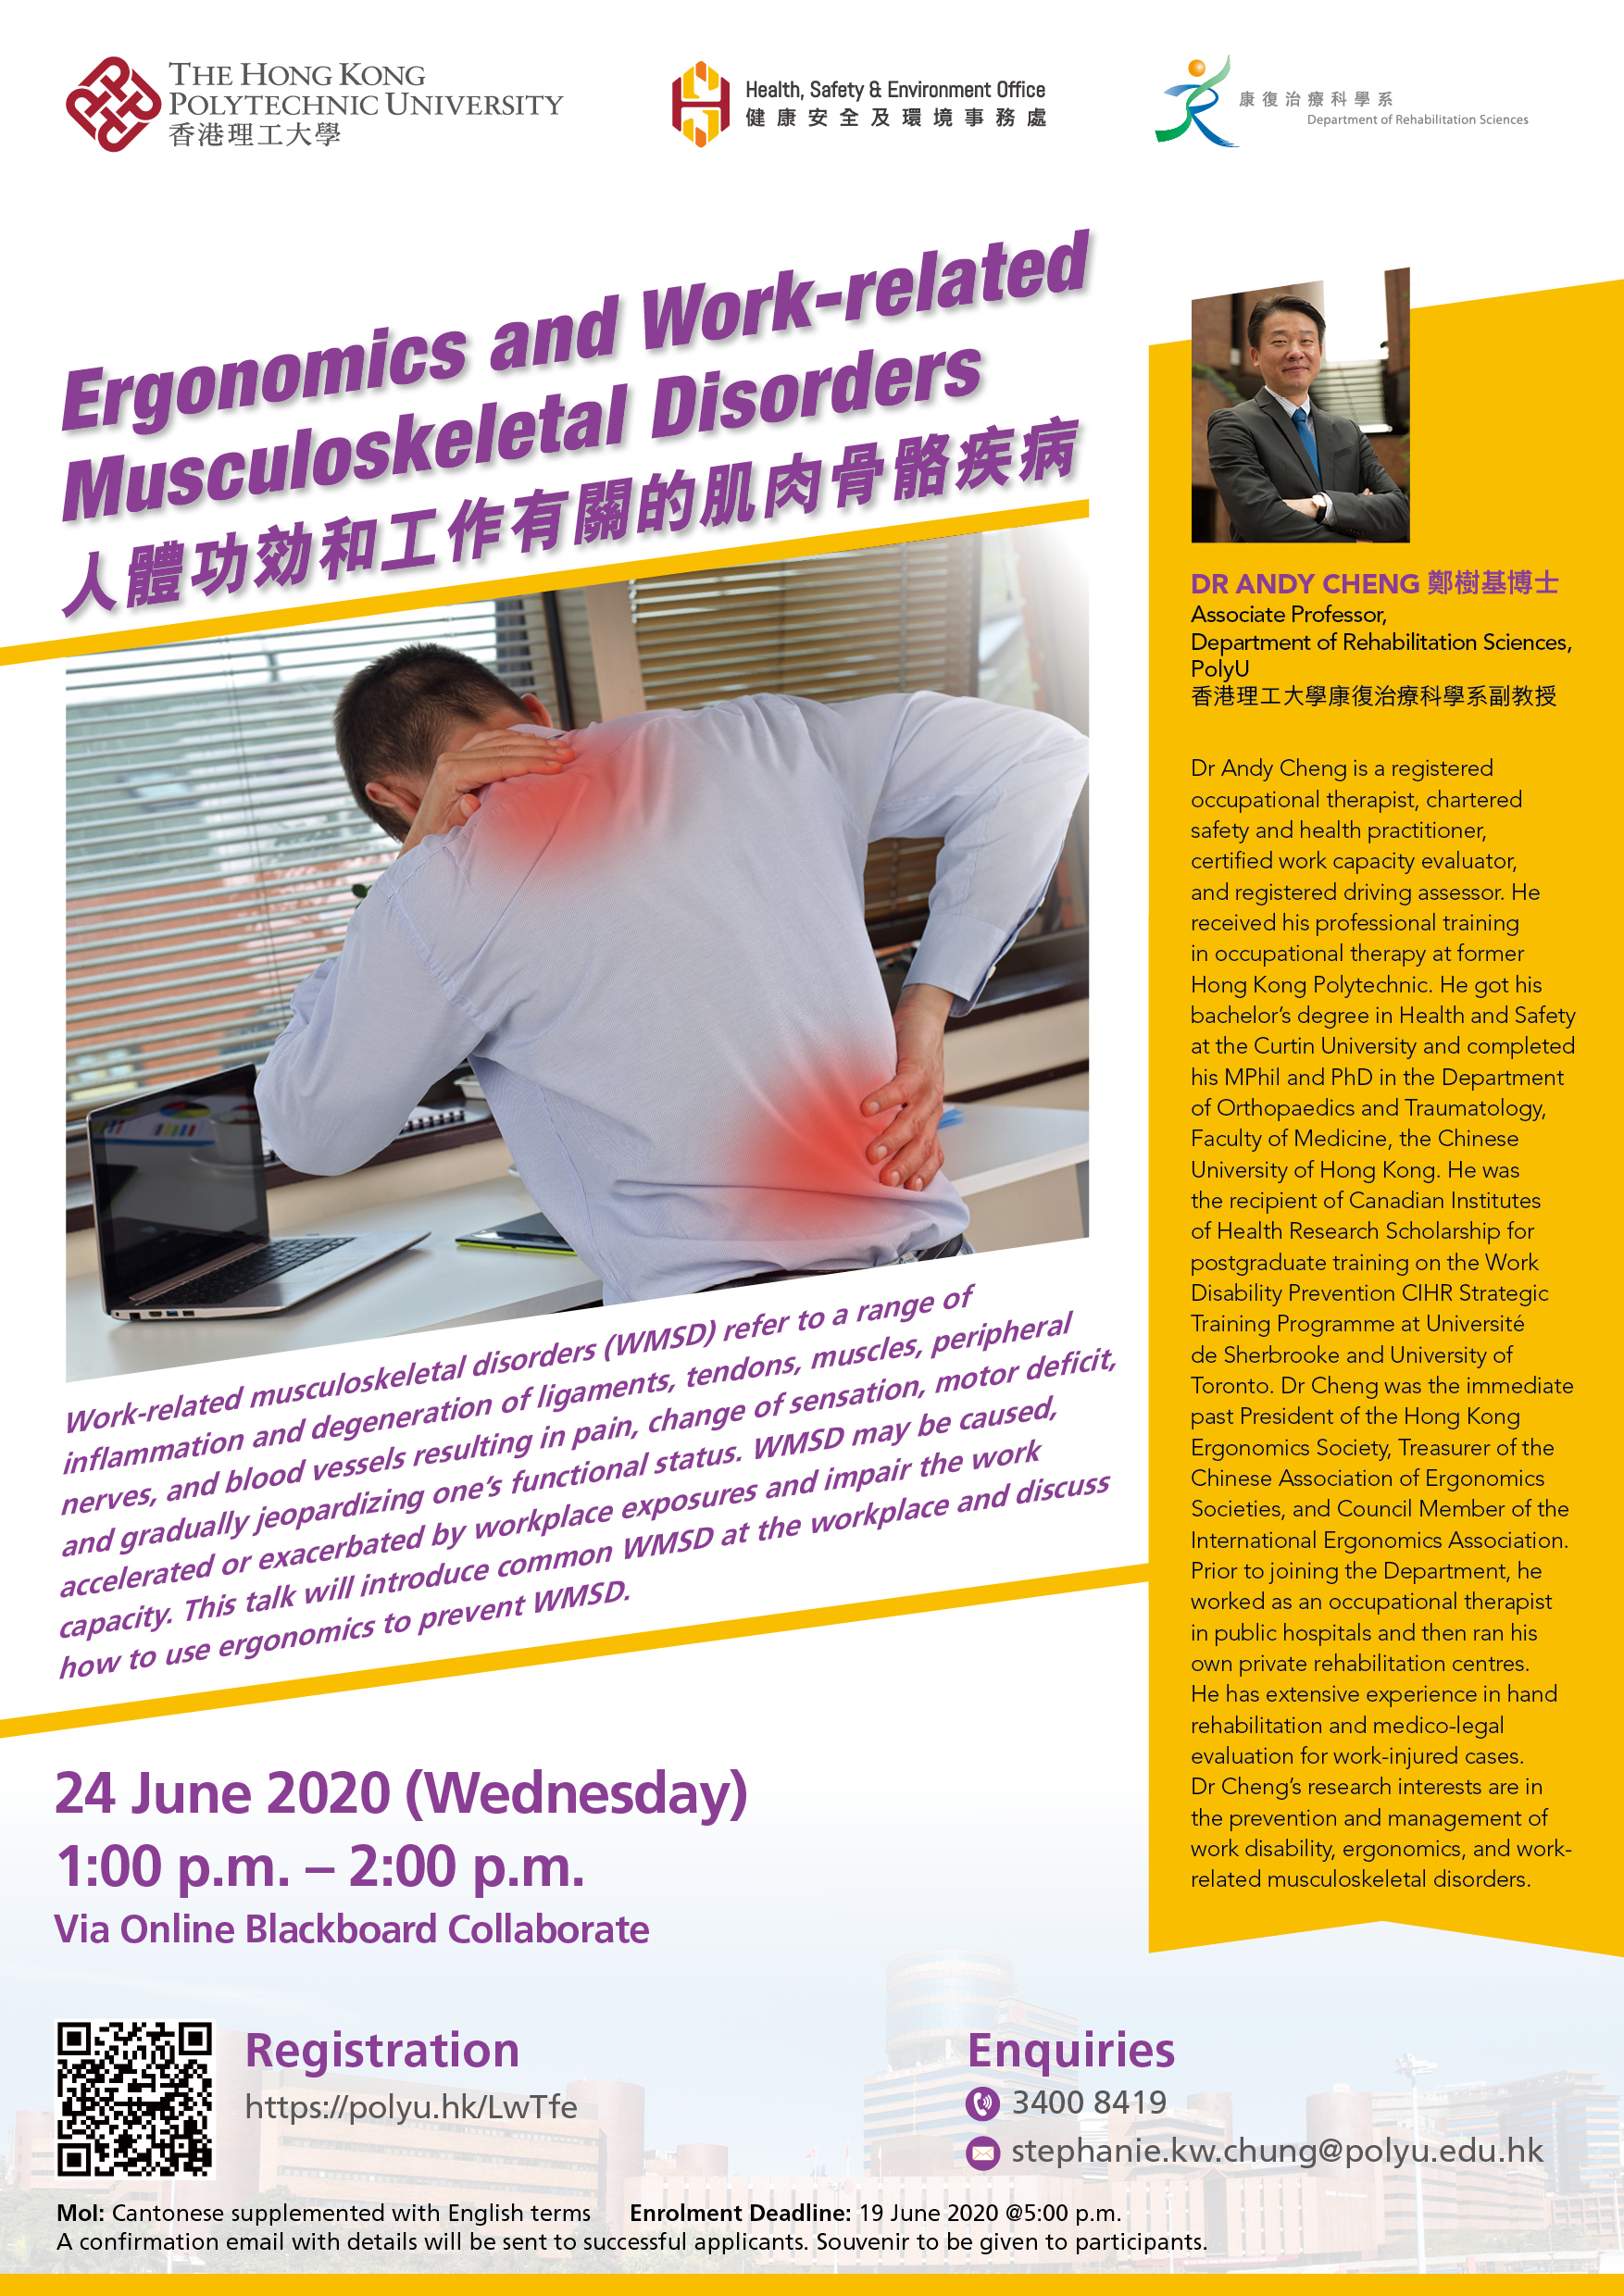 Ergonomics and Work-related Musculoskeletal Disorders